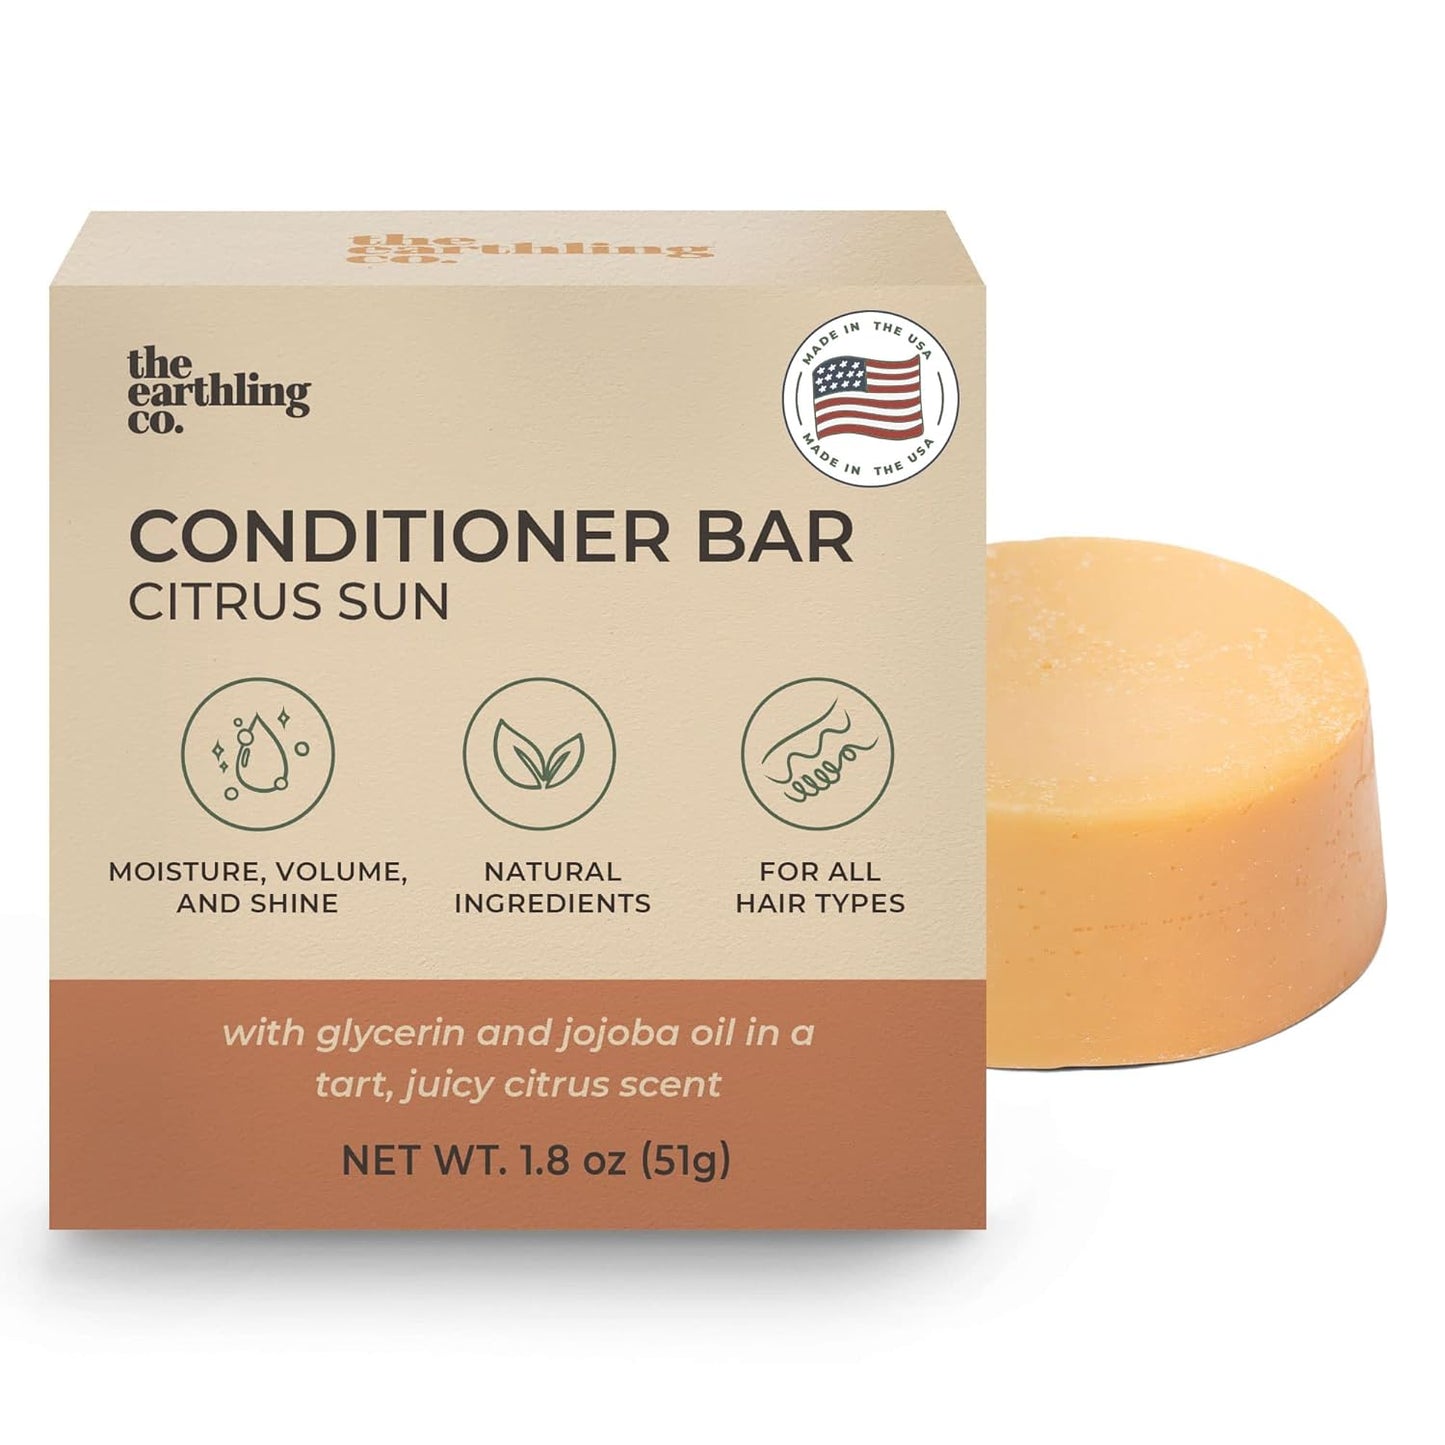 Conditioner Bar - Promote Hair Growth, Strengthen & Moisturize All Hair Types - Paraben & Sulfate Free Formula with Natural Ingredients for Dry Hair (Citrus Sun, 1.8 Oz)